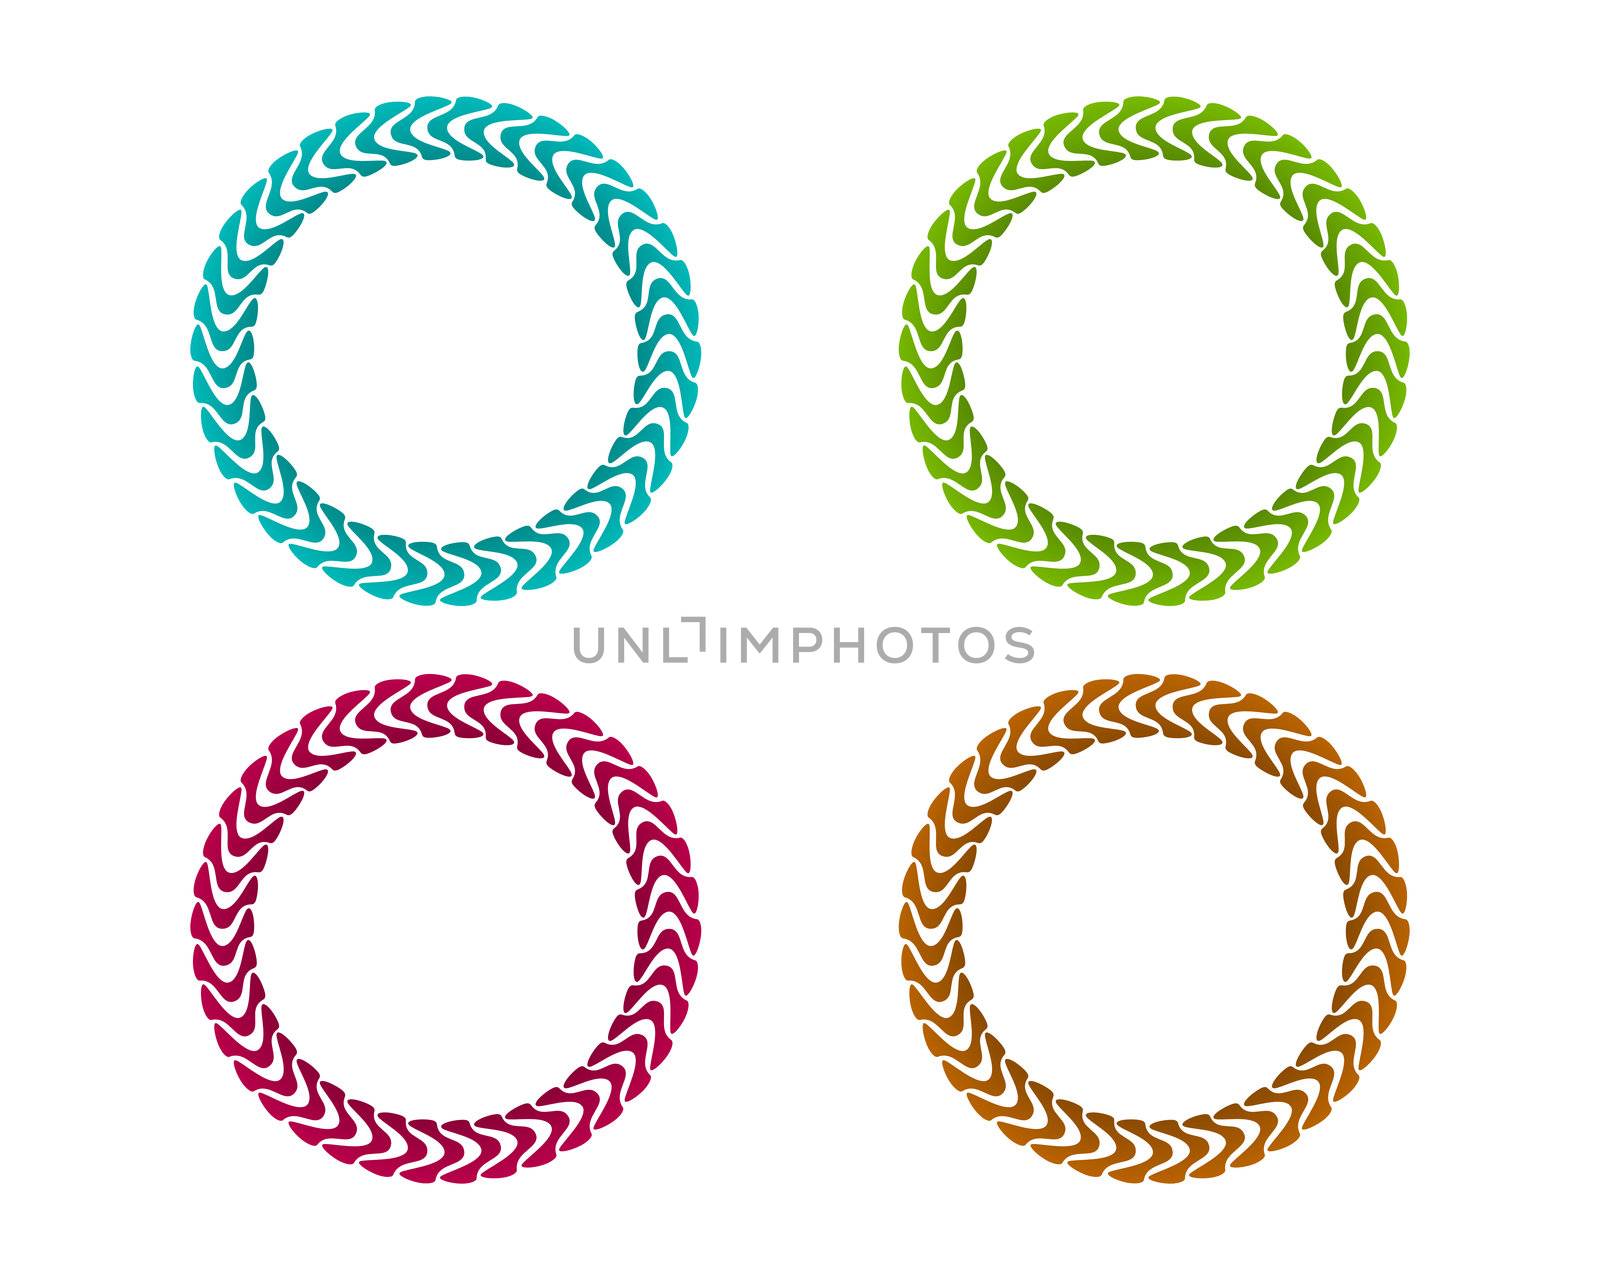 Colored wreaths by rbiedermann